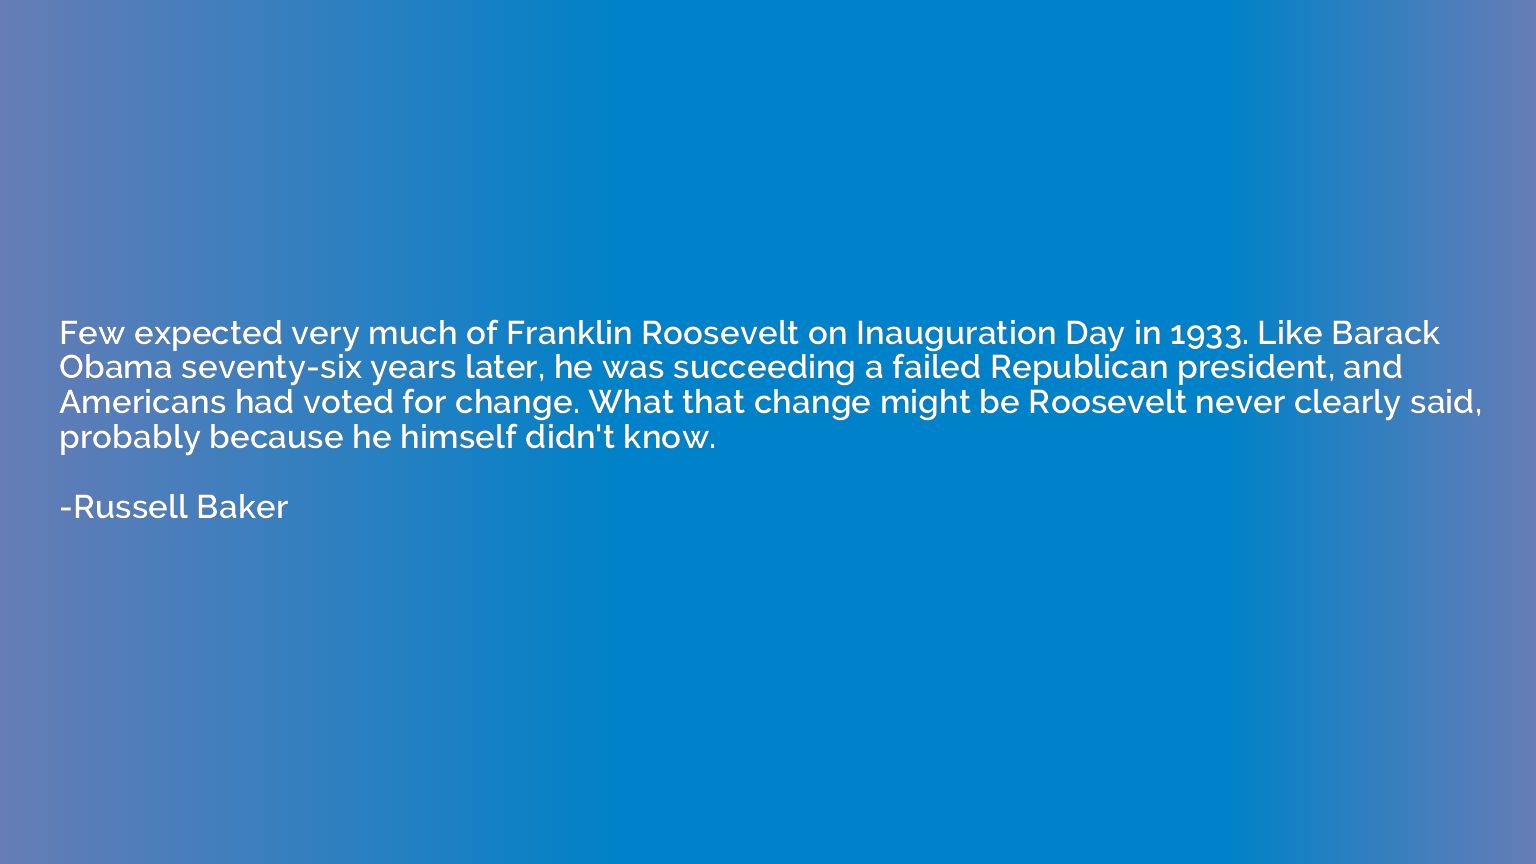 Few expected very much of Franklin Roosevelt on Inauguration